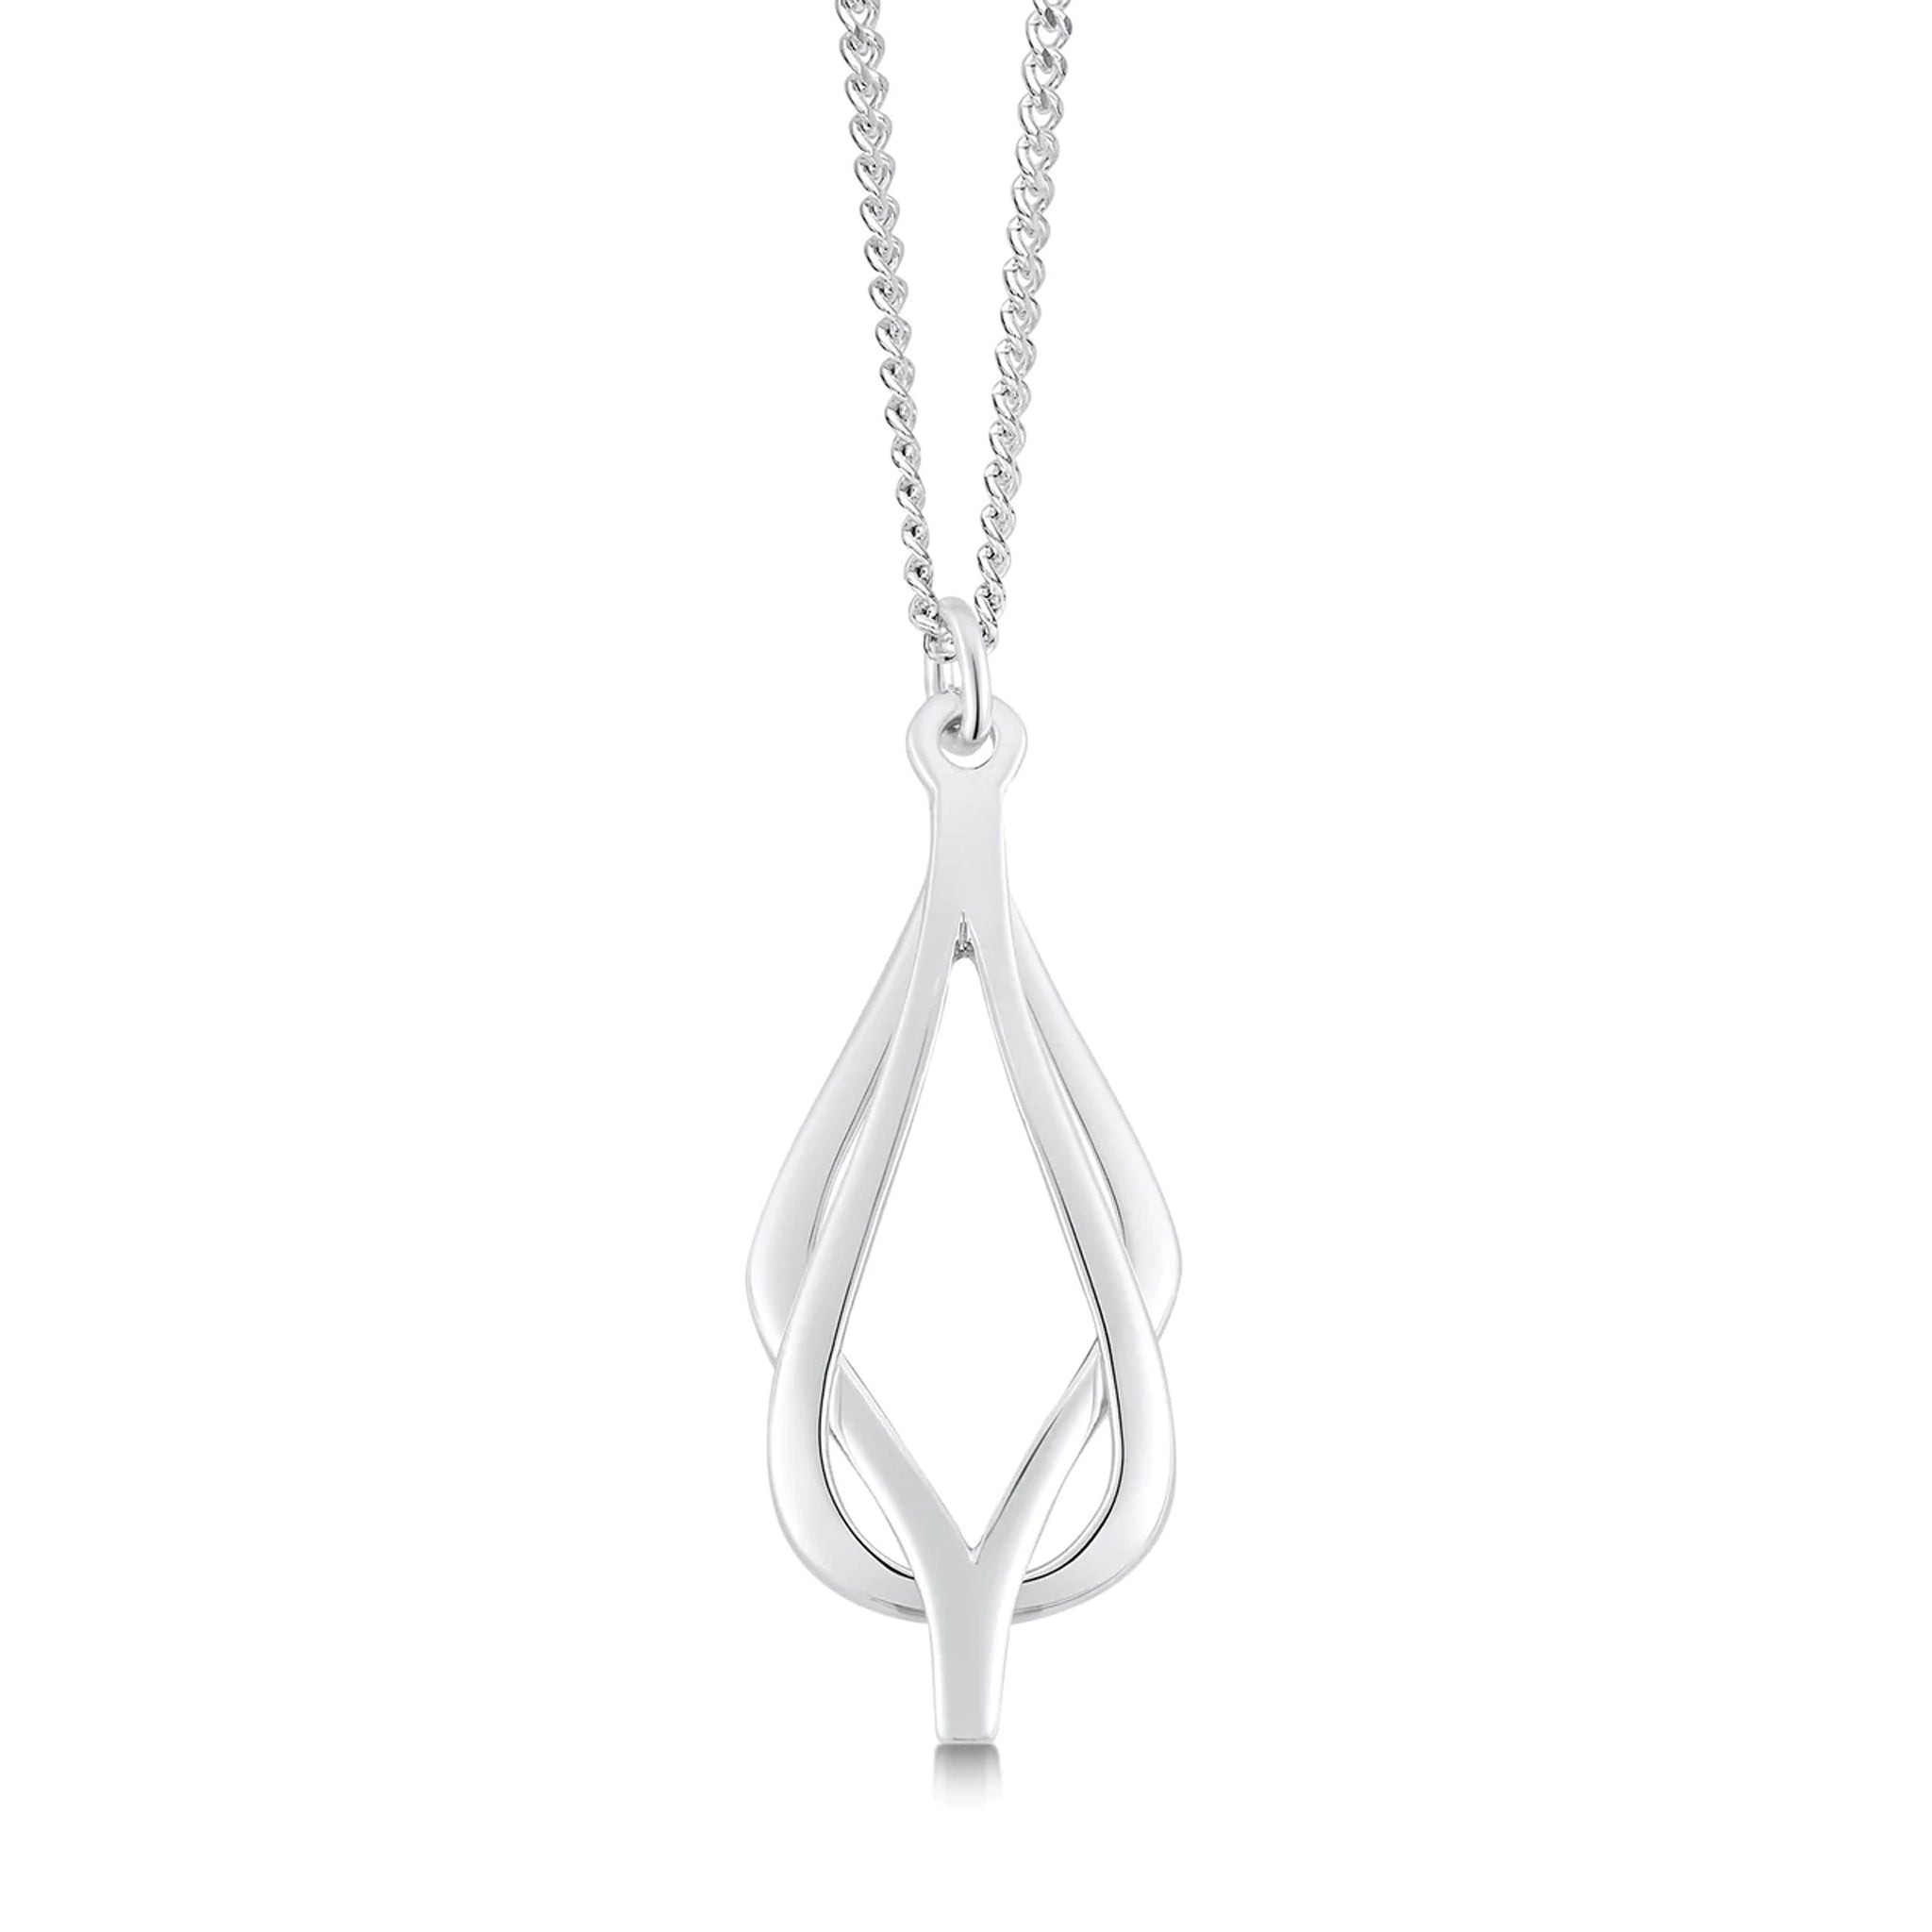 Polished silver pendant in simple reef knot design on a silver chain